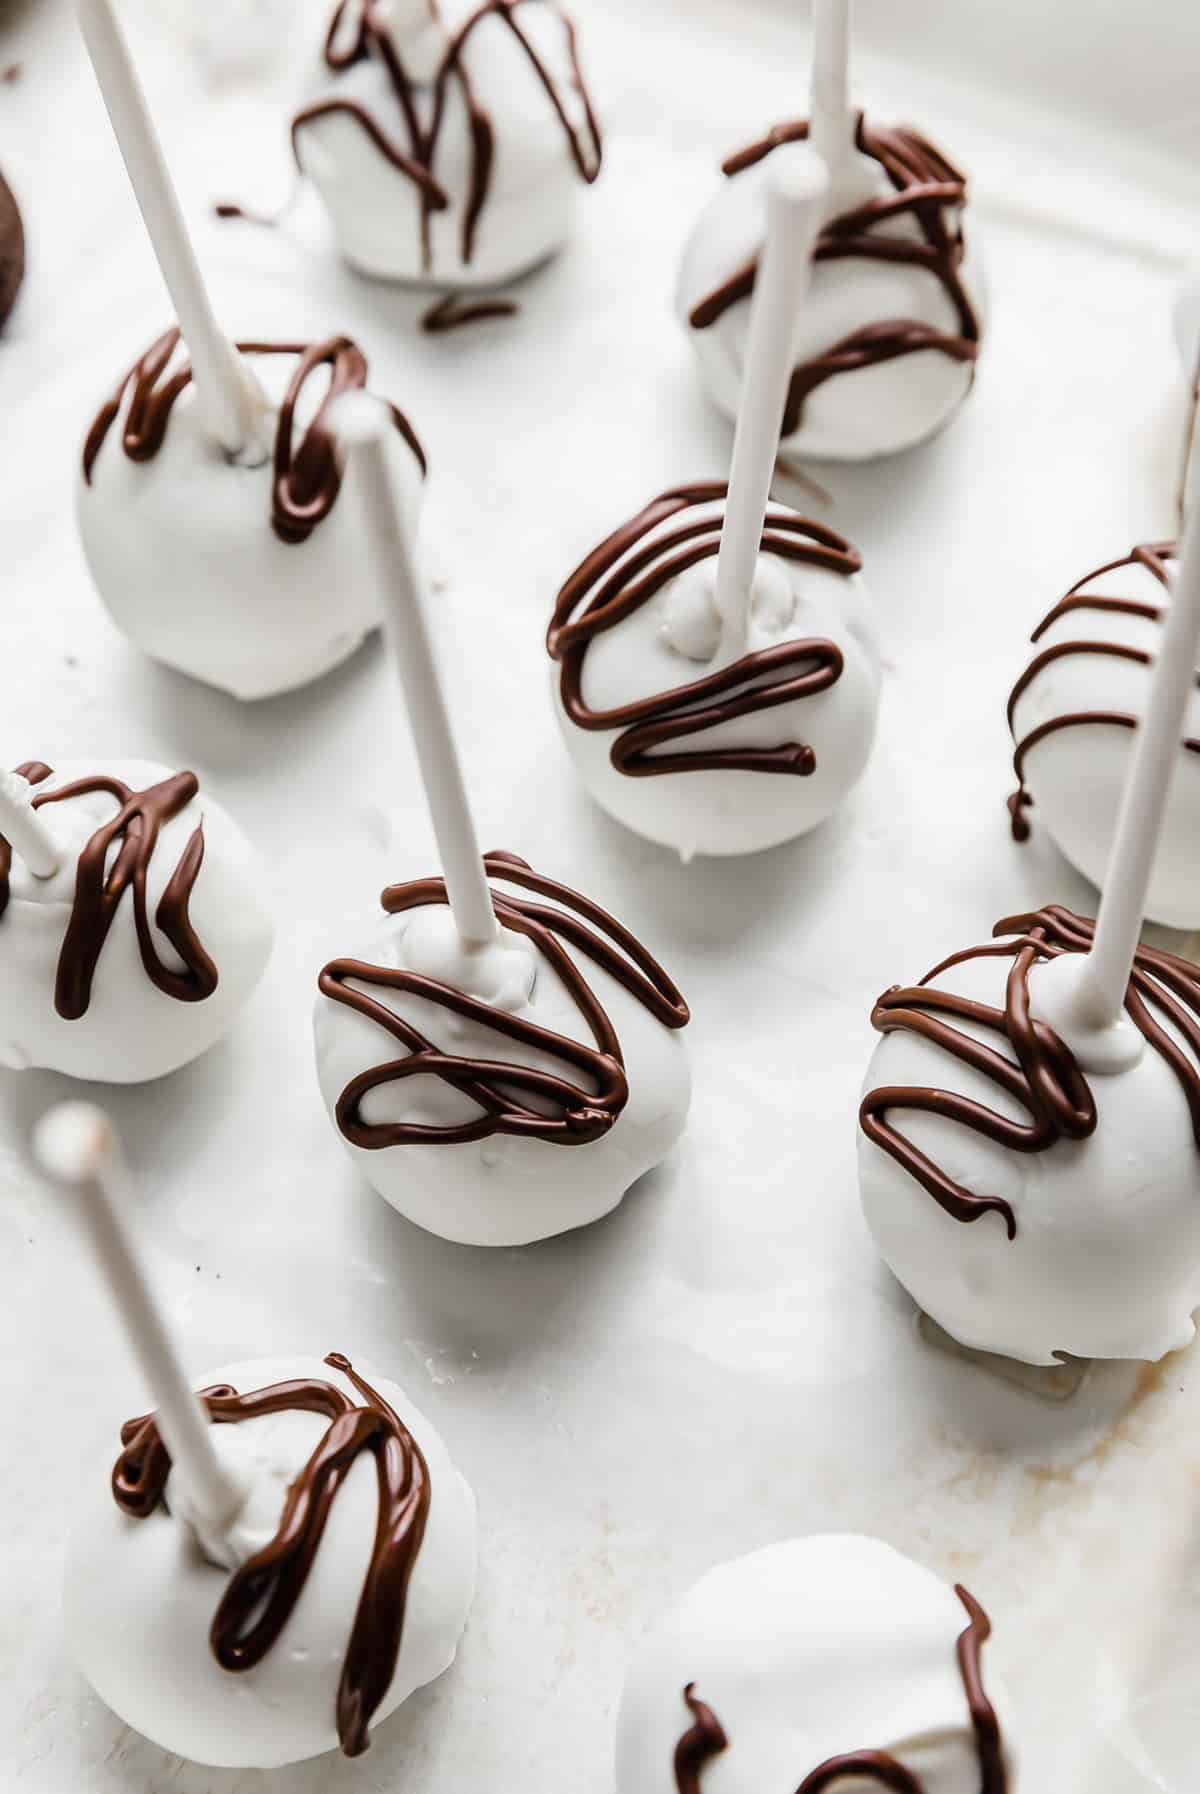 Oreo Cake Pops covered in white chocolate and drizzled with brown chocolate overtop.